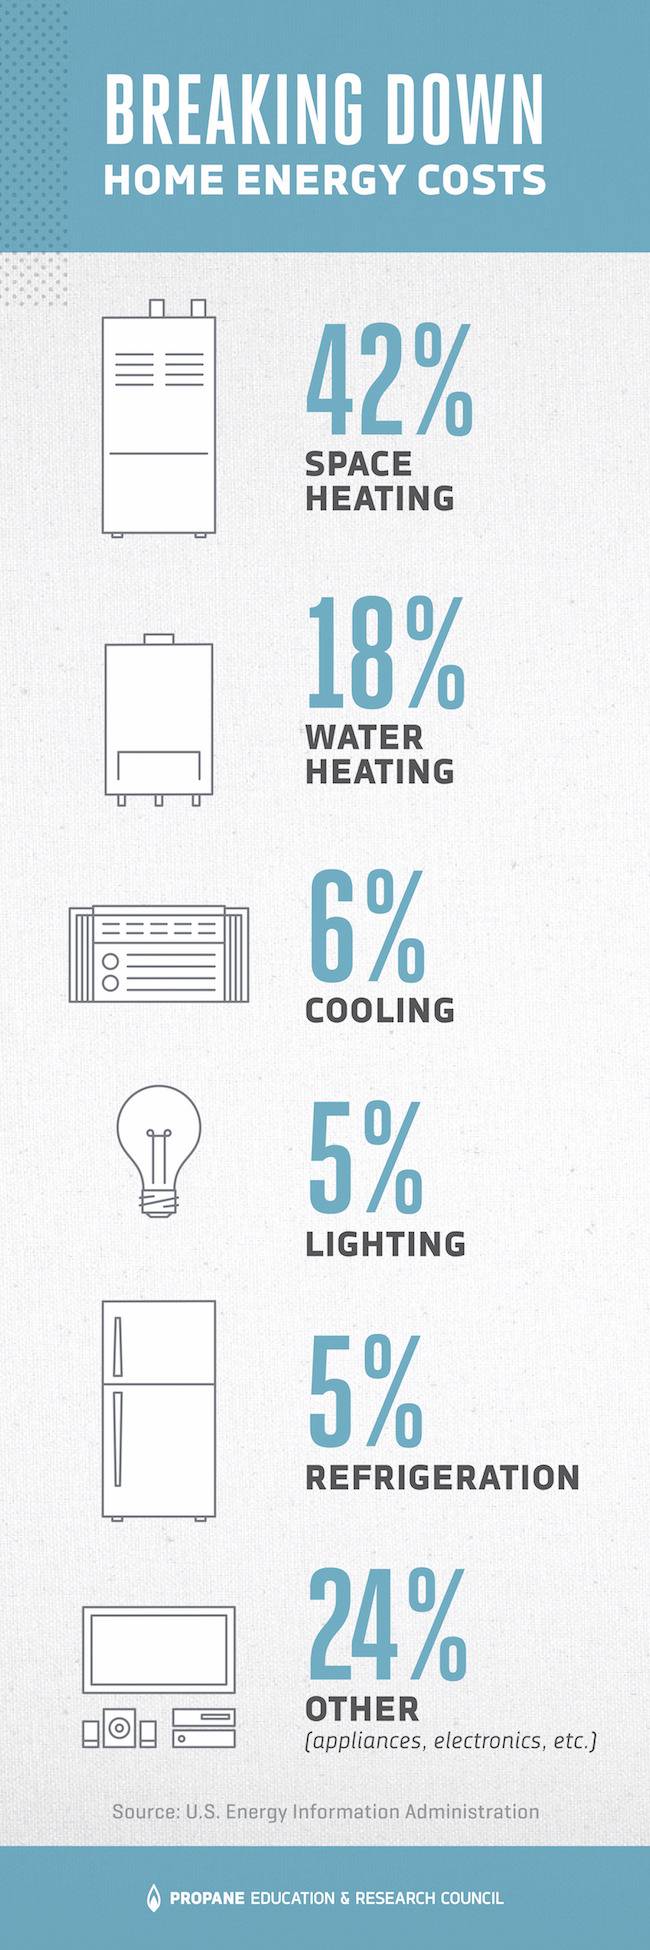 Home energy usage facts.